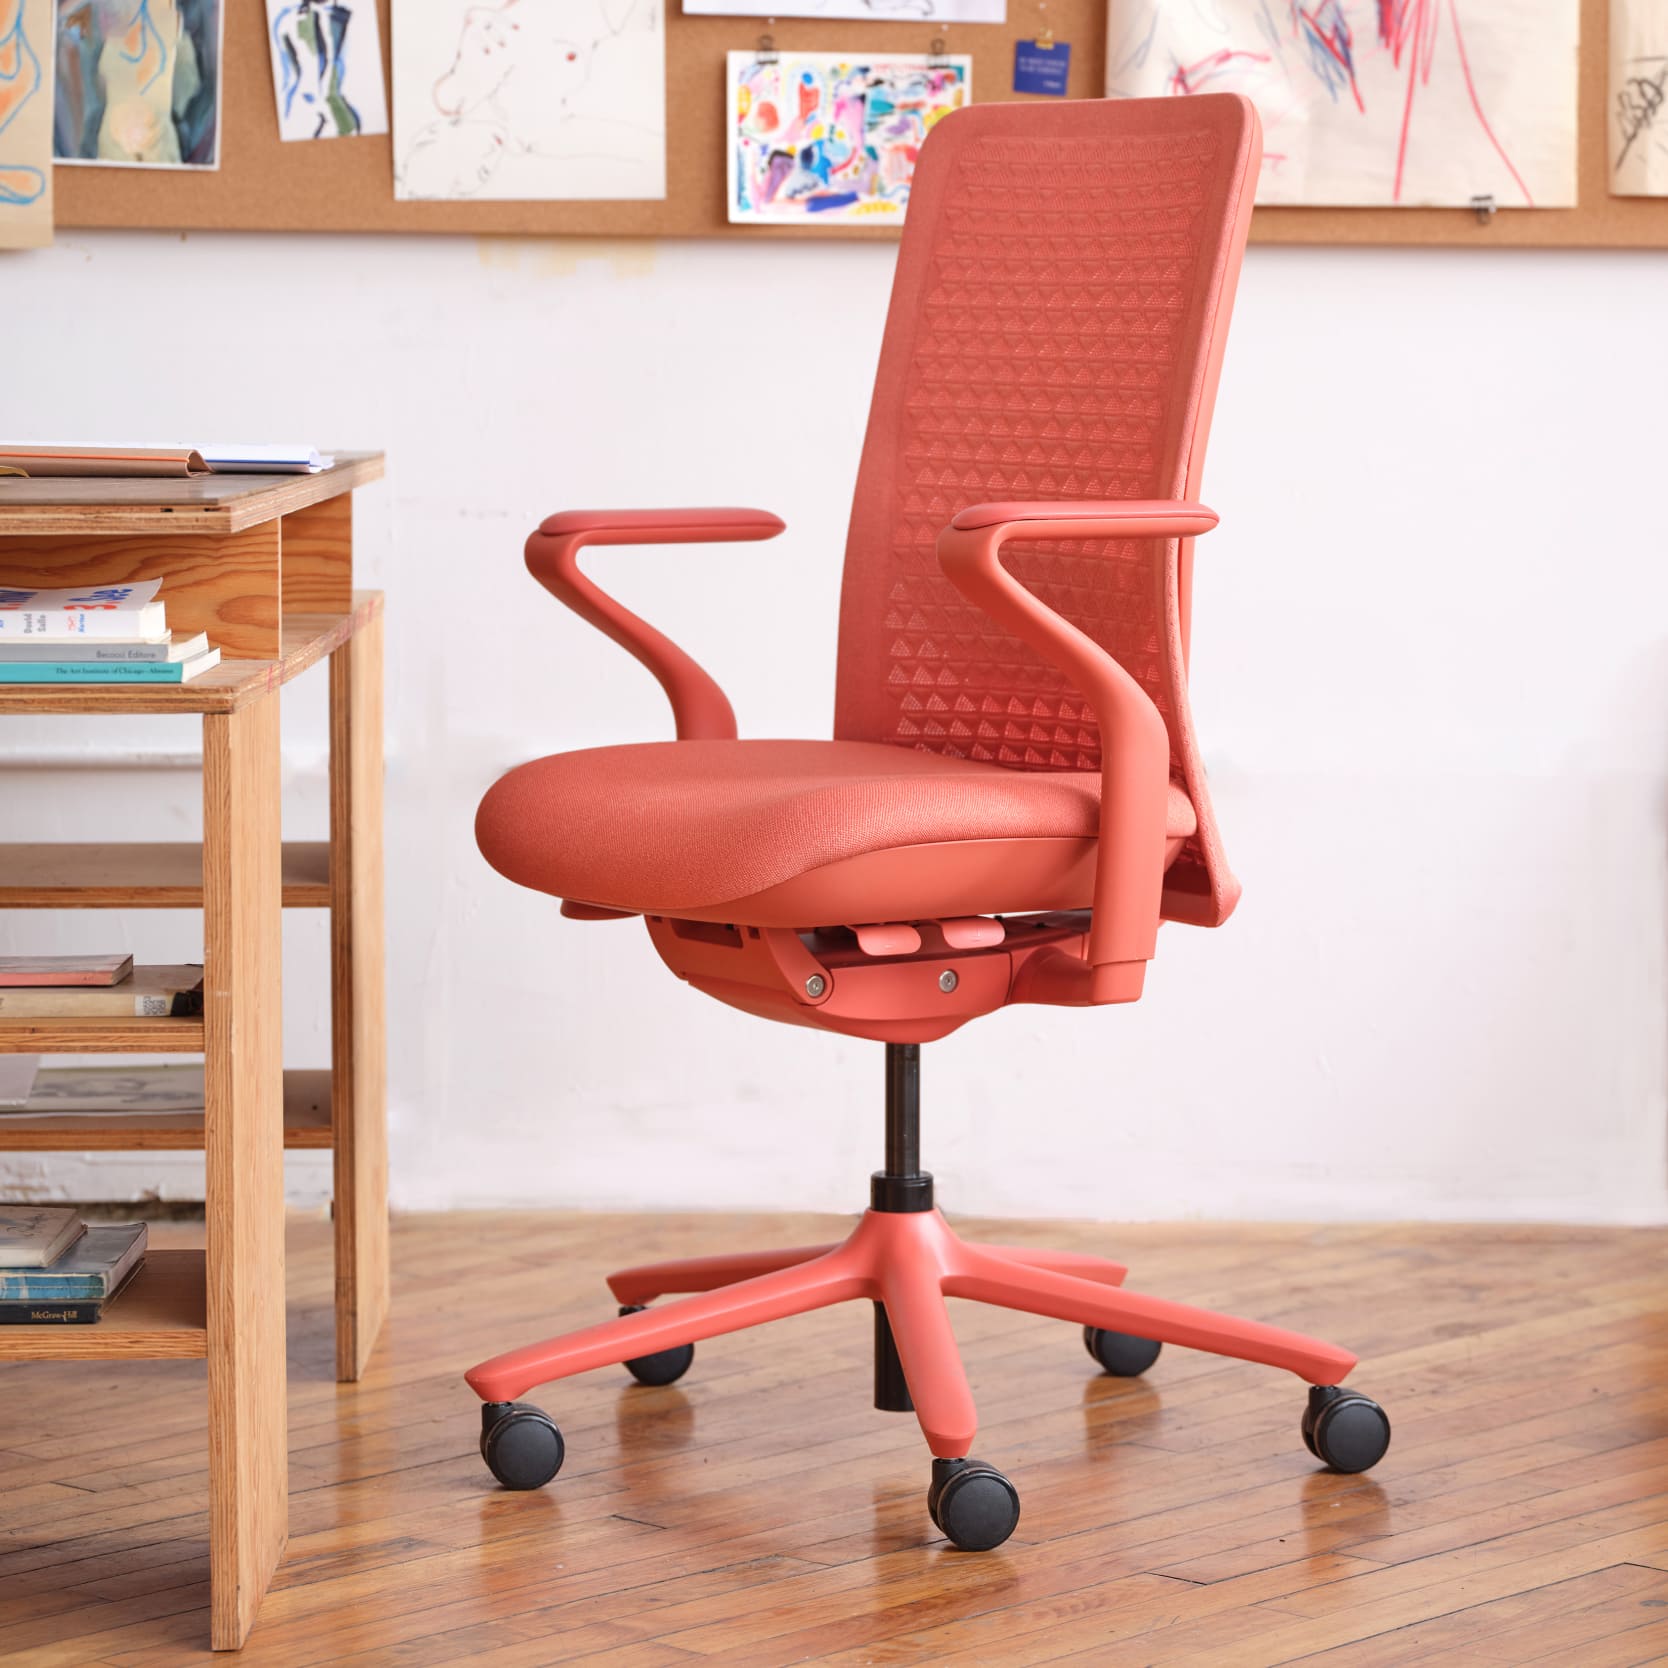 The technology behind the best office chair for posture - Buro Seating